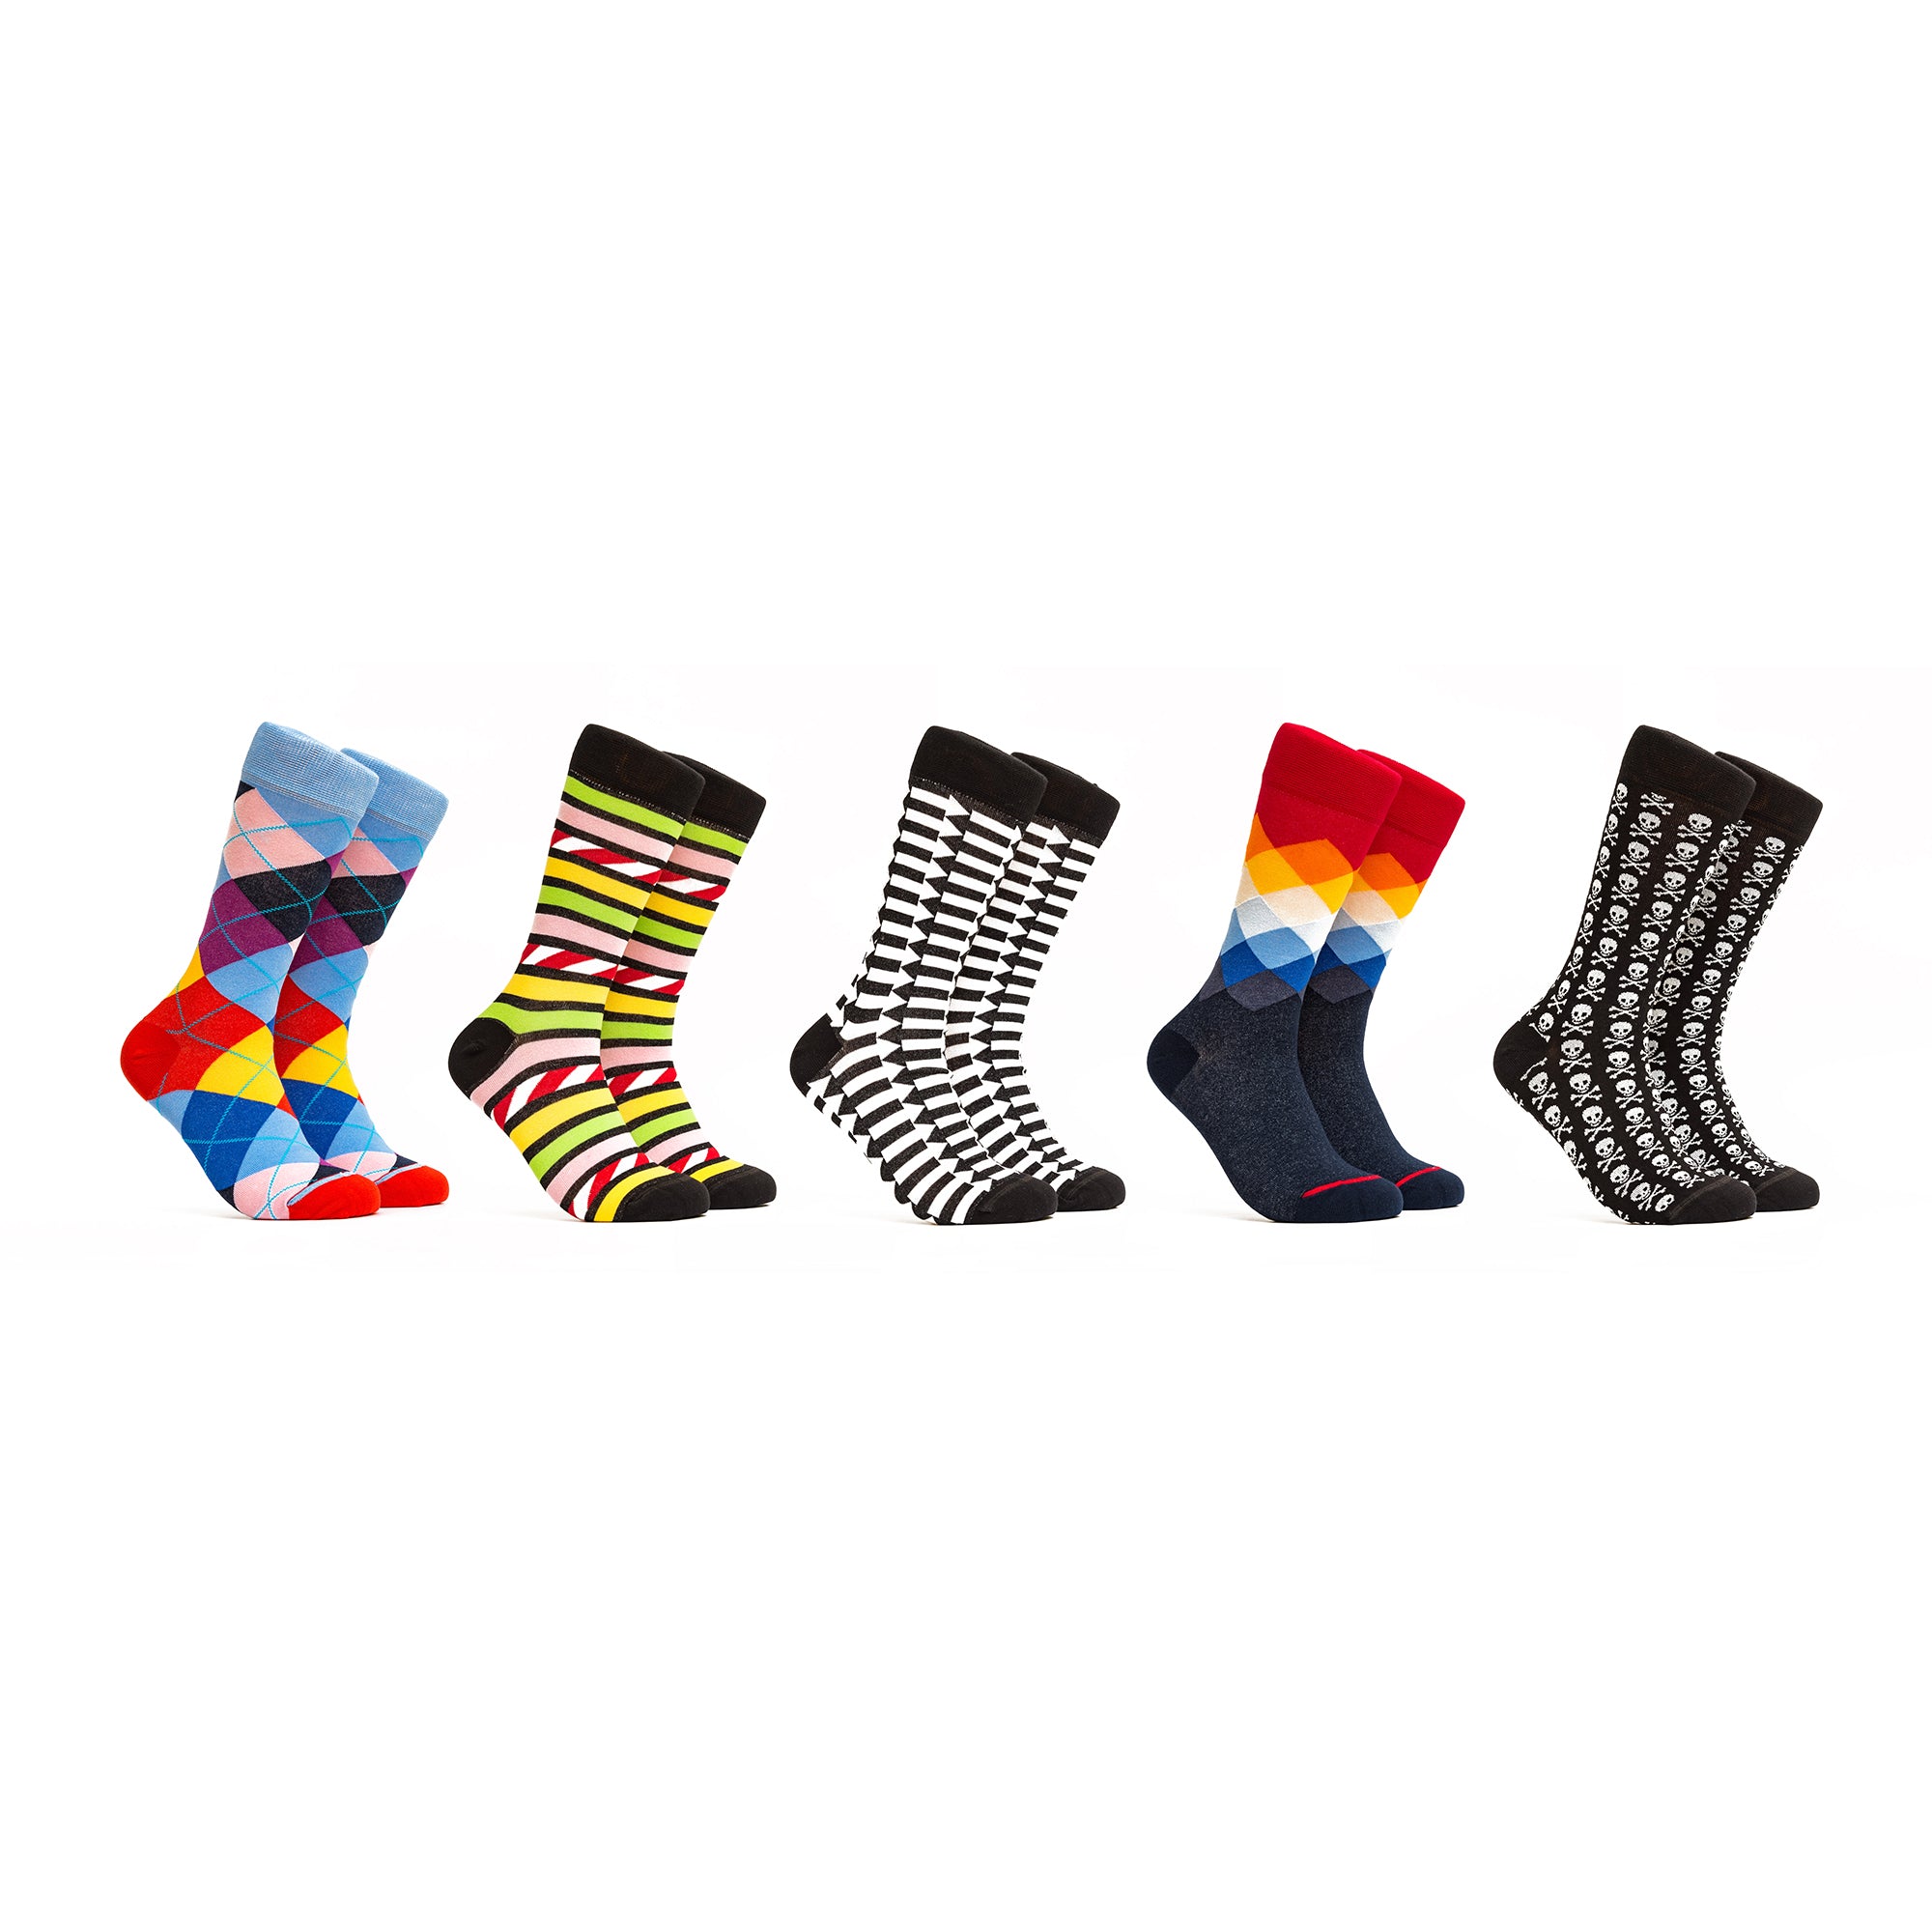 The Figures 1 Combo - Colors Black, Blue, Green, Red - 5 Pairs